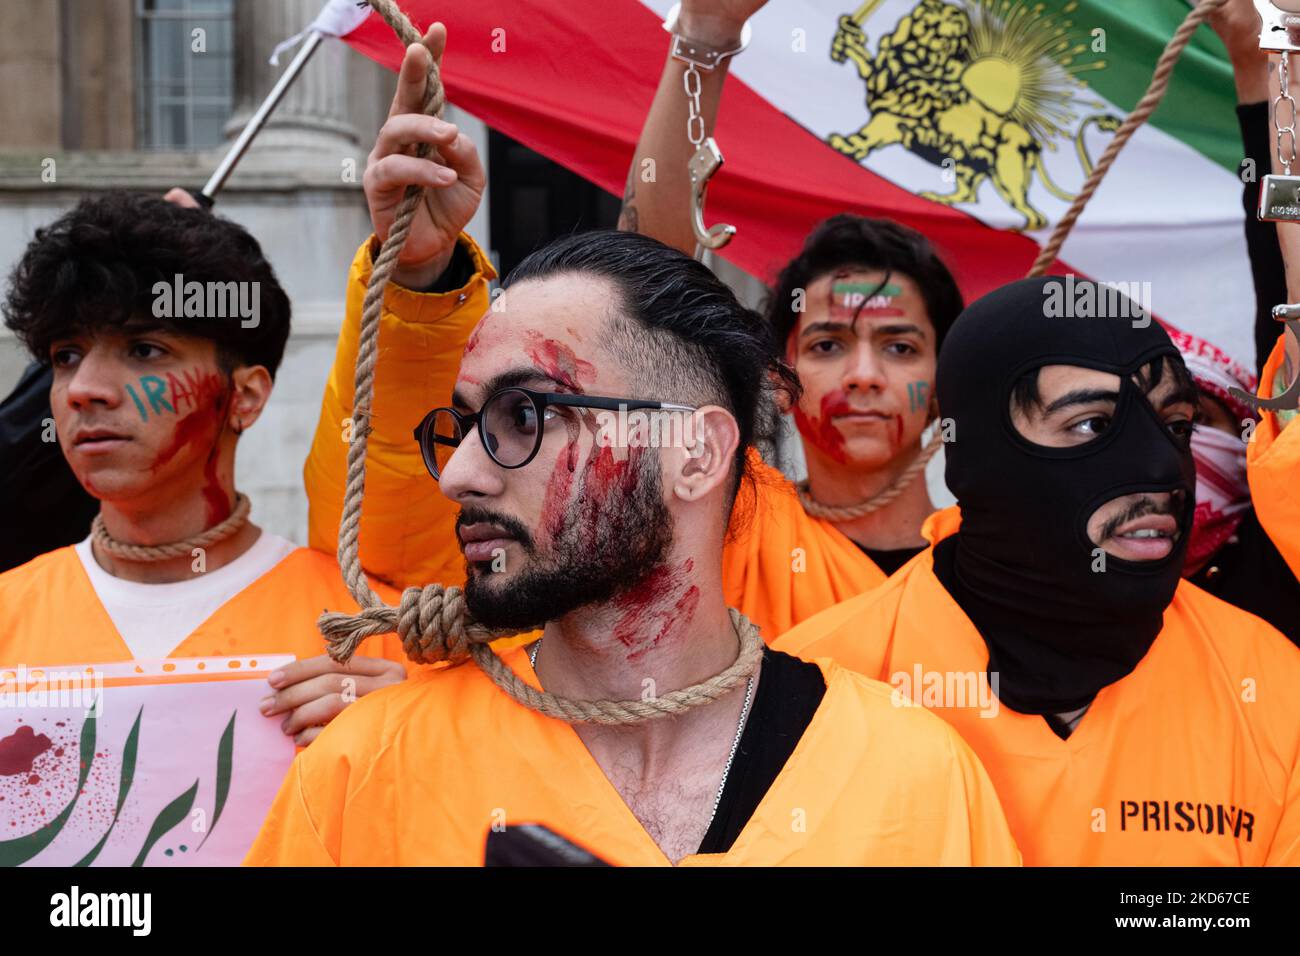 London, UK. 5th November 2022. Protestors recreate scenes of Prisoner Abuse and execution by the Iranian Regime. Stock Photo